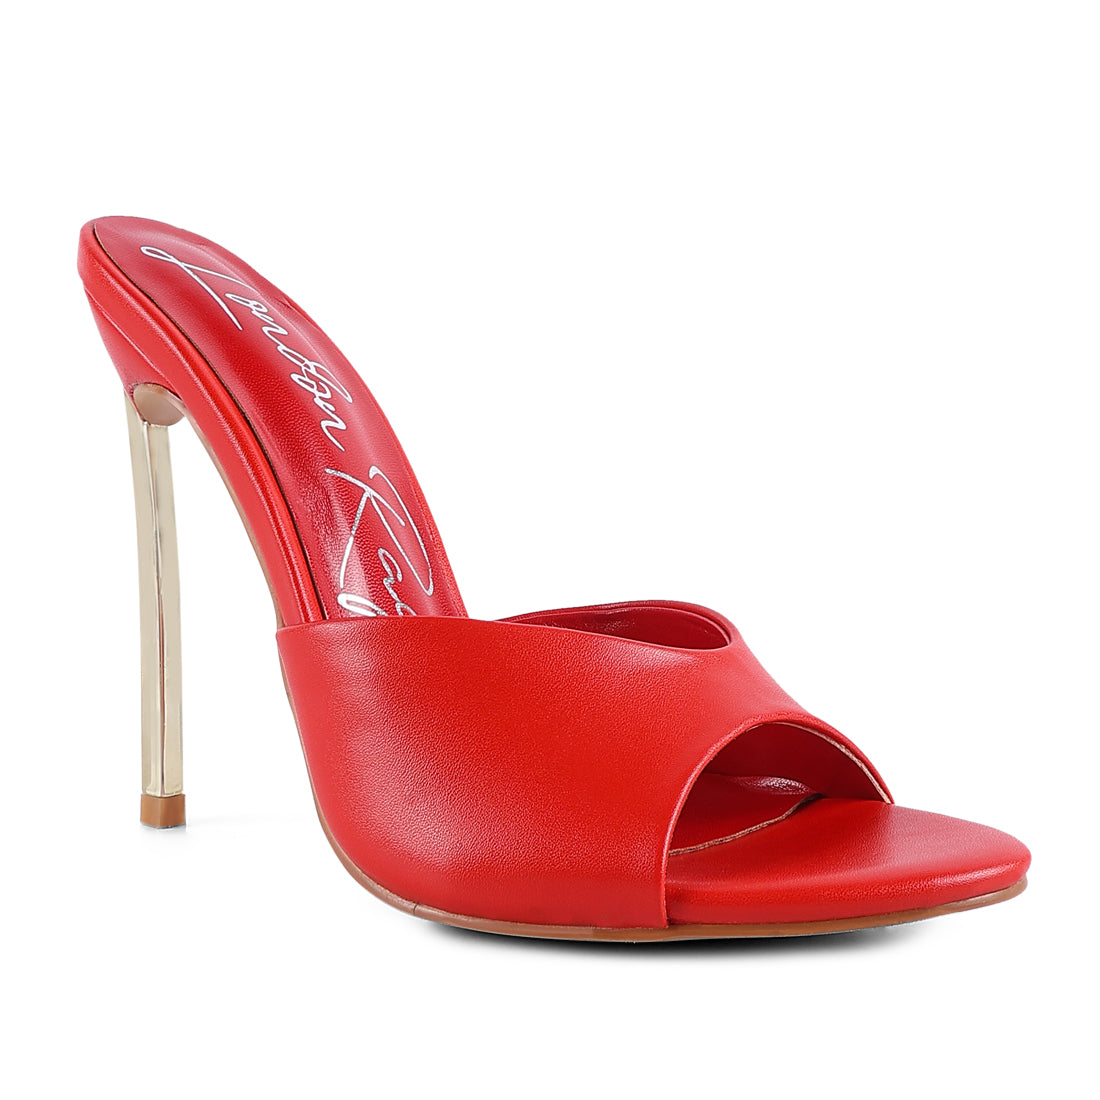 High Heeled Sliders Sandals in Red